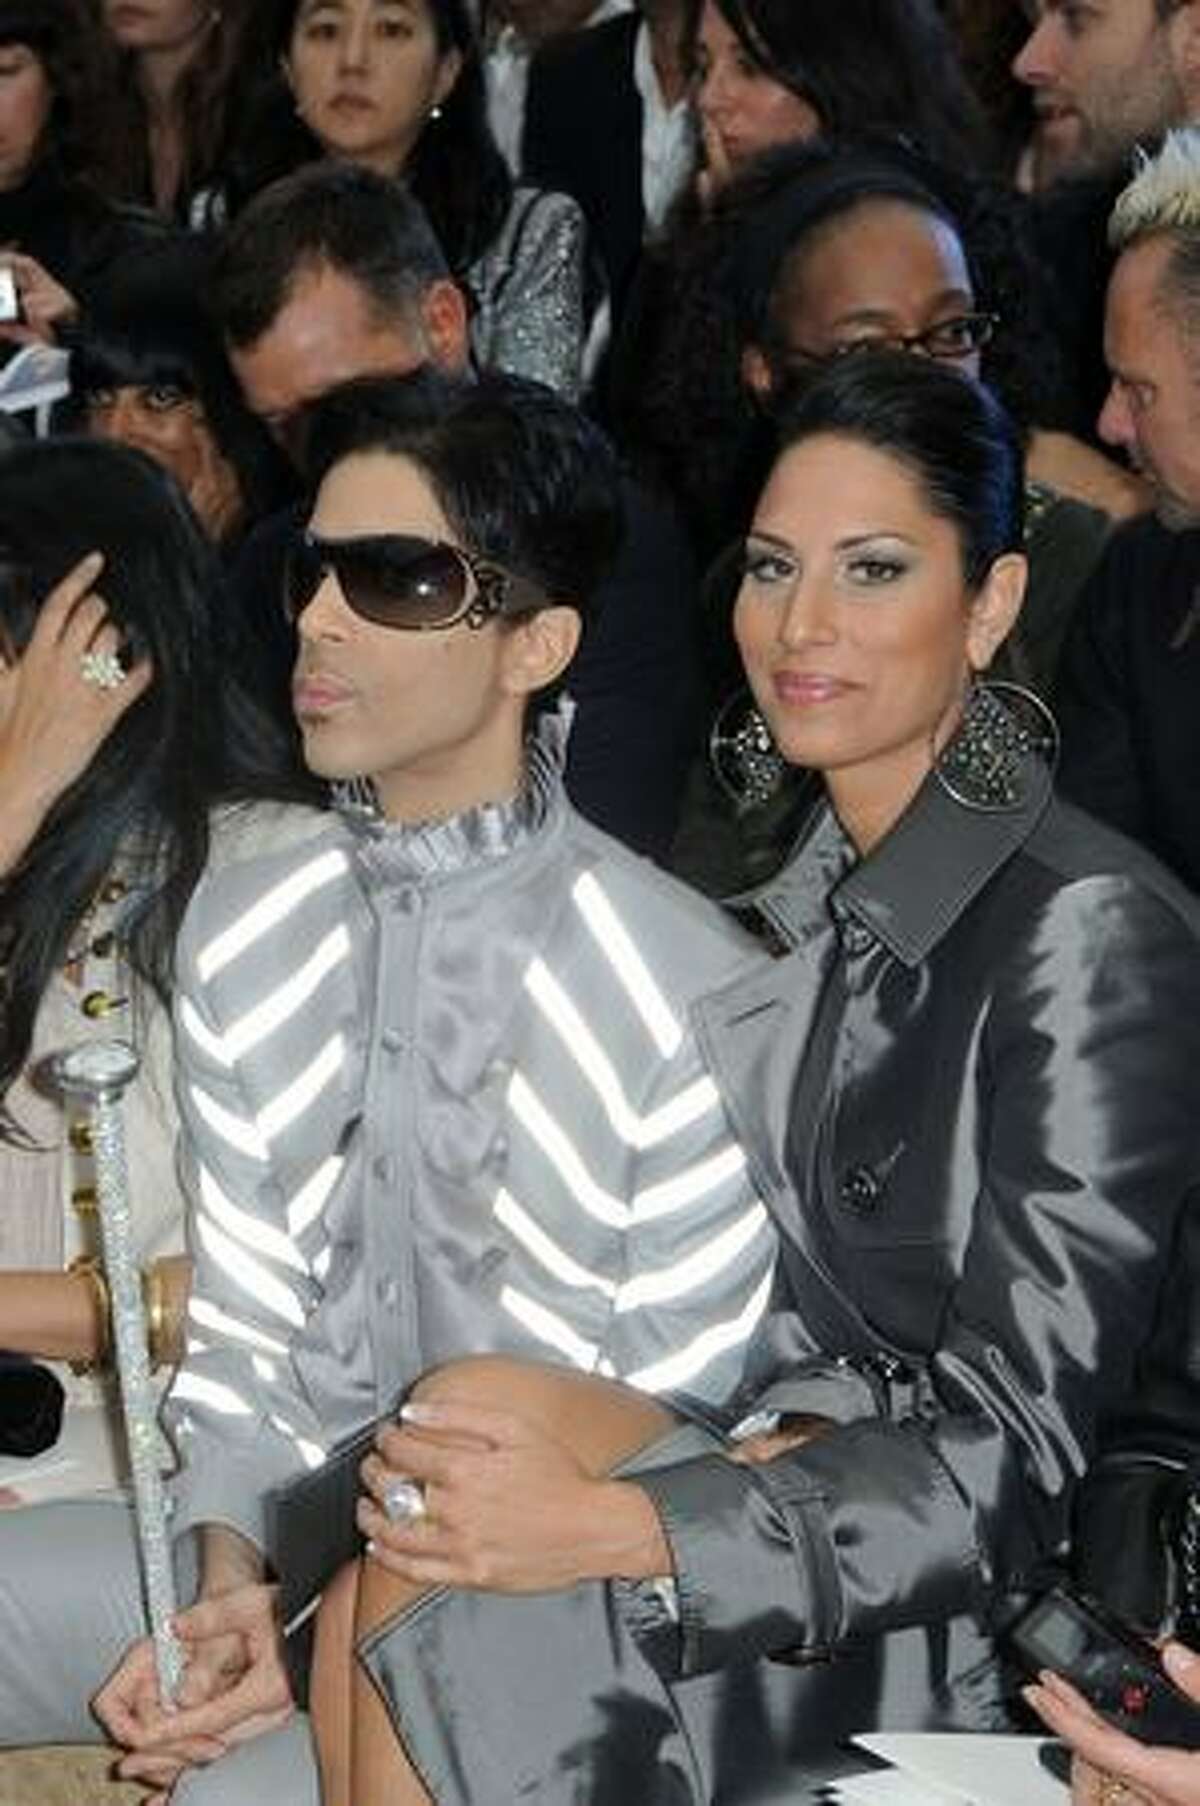 Prince and guest attend.